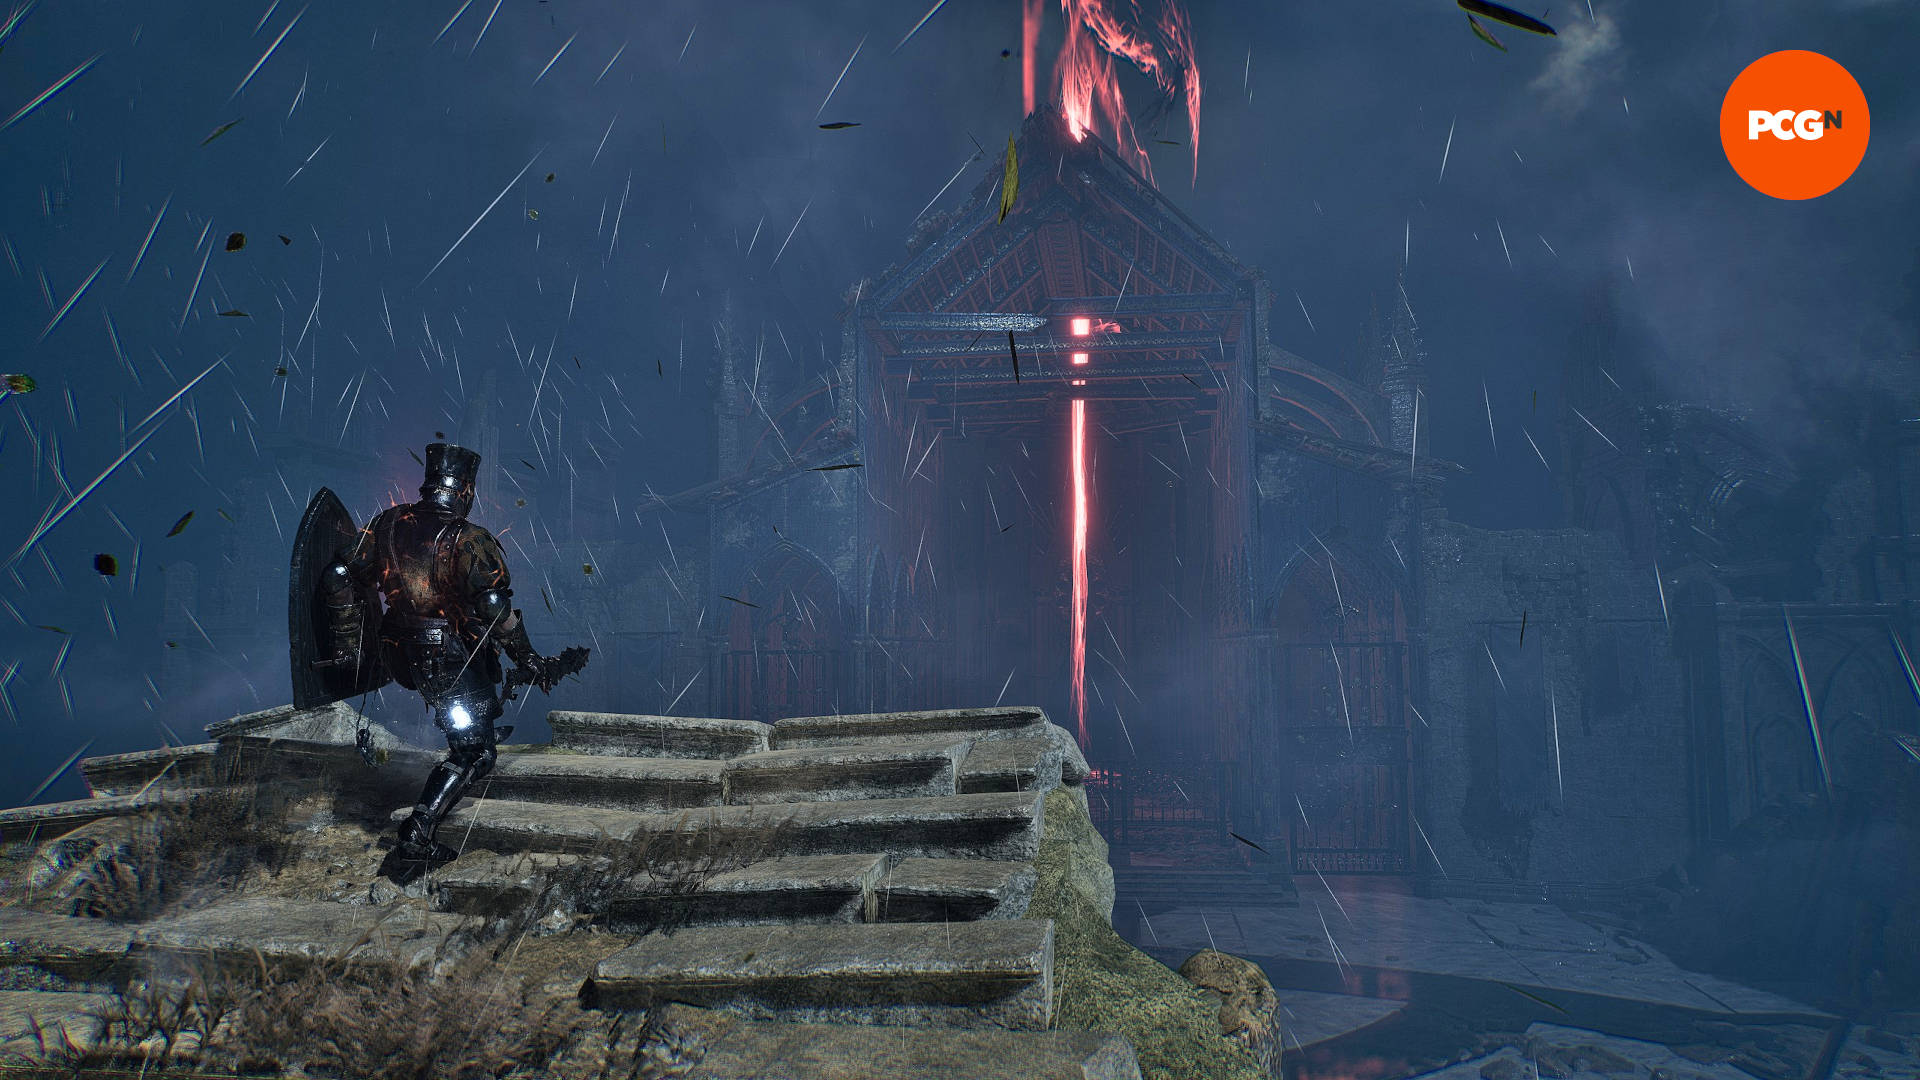 Lords of the Fallen Guides Wiki page: 1